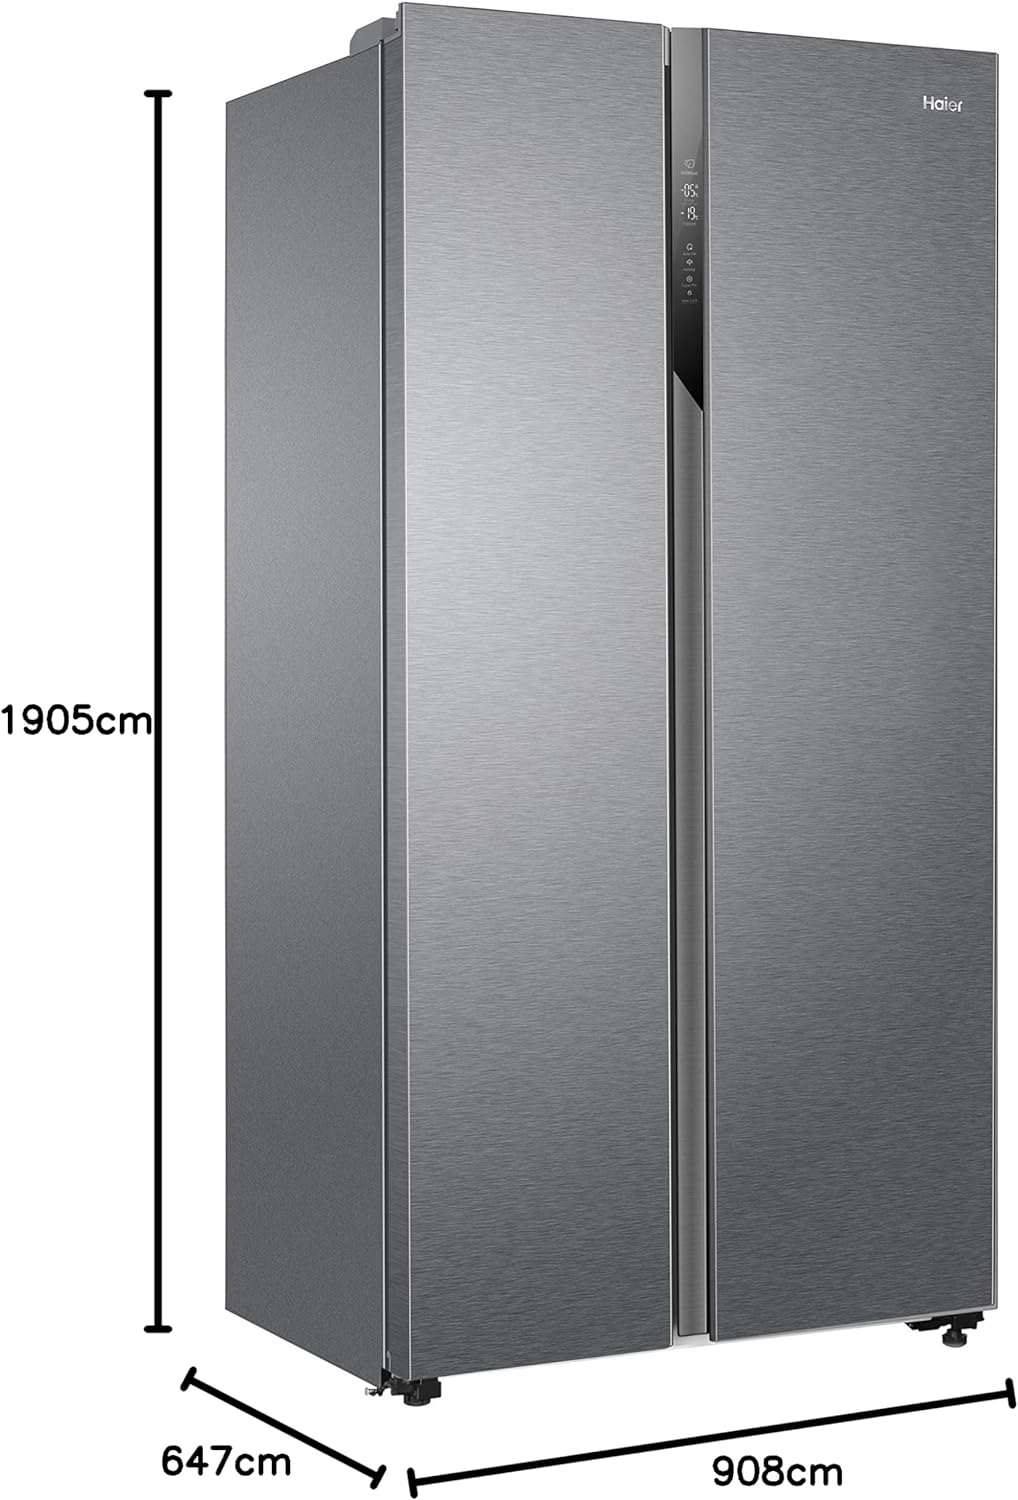 Haier HSR3918ENPG American Style Fridge Freezer, Silver, 528 L Capacity, 2 Doors, 90.8cm Wide, Silver, E Rated   Import  Single ASIN  Import  Multiple ASIN ×Product customization General Description Gallery Reviews Variations Additio - Amazing Gadgets Outlet